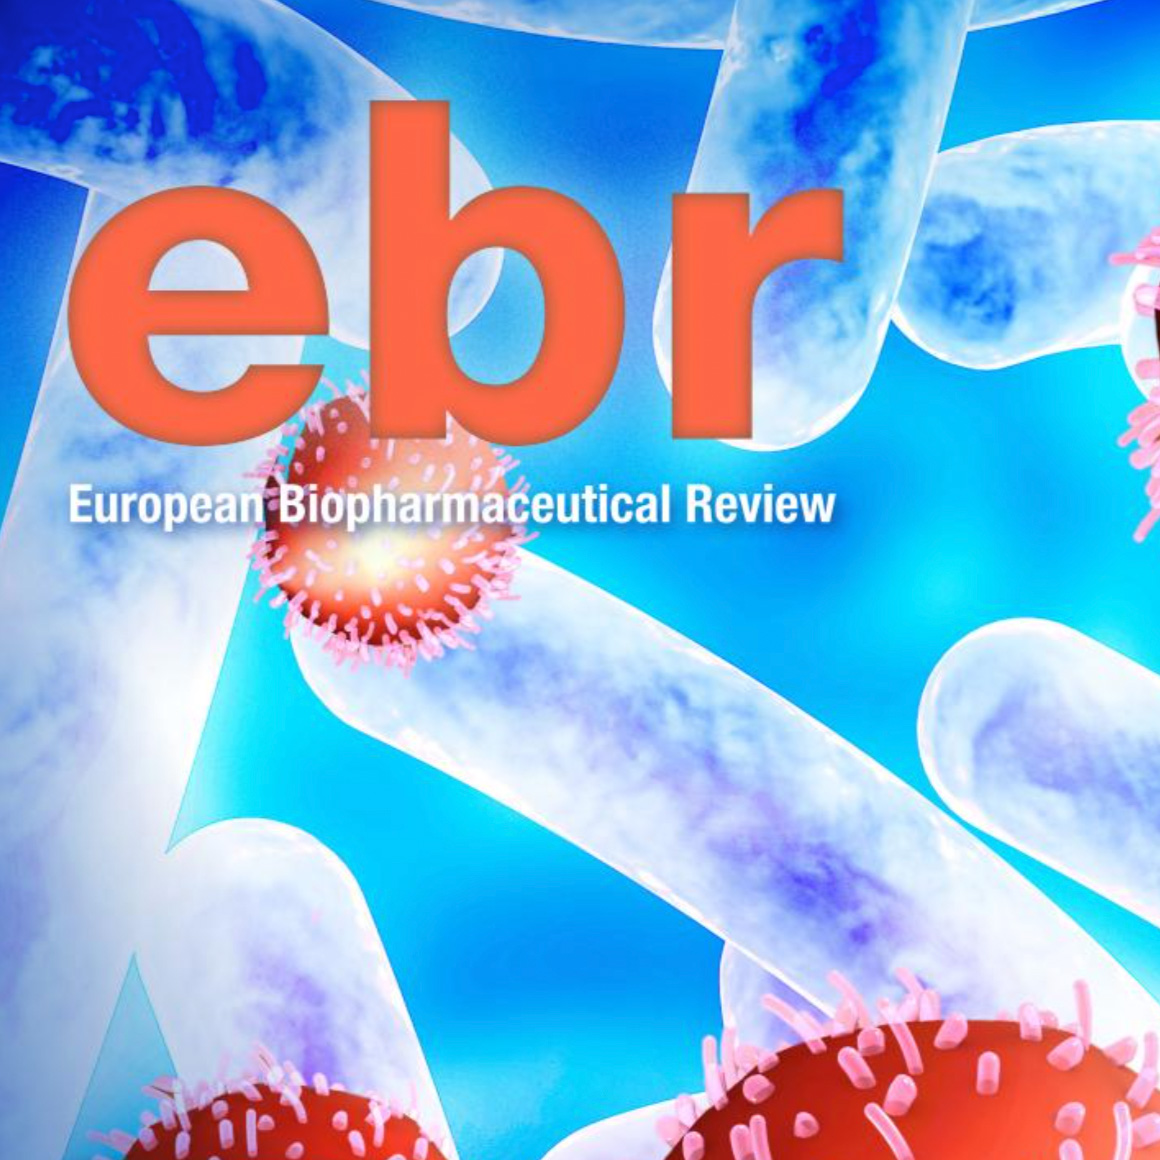 “We Are Losing Our Strongest Allies Against Infectious Diseases” - Dr. Alexander Sturm for European Biopharmaceutical Review (EBR)